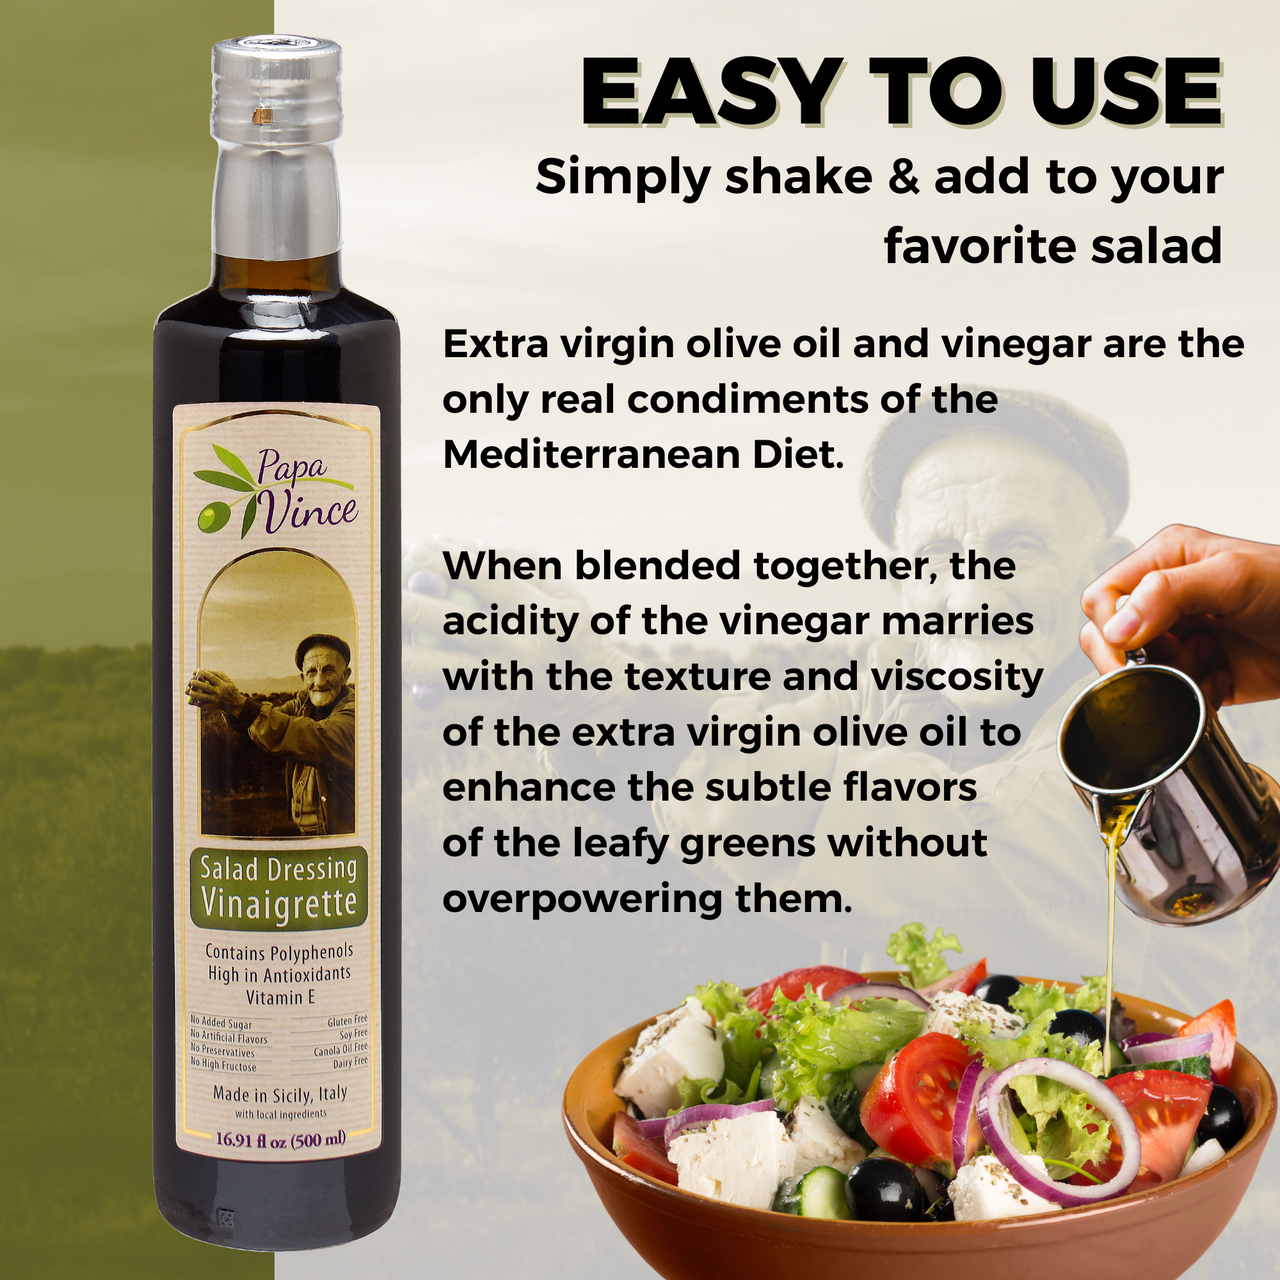 Low Sodium Salad Dressing - Low Carb, Gluten-Free, No Sugar Added. Classic Vinaigrette blend of extra virgin olive oil & balsamic vinegar. High in Antioxidants & Vitamins. Perfect for salad - Papa Vince